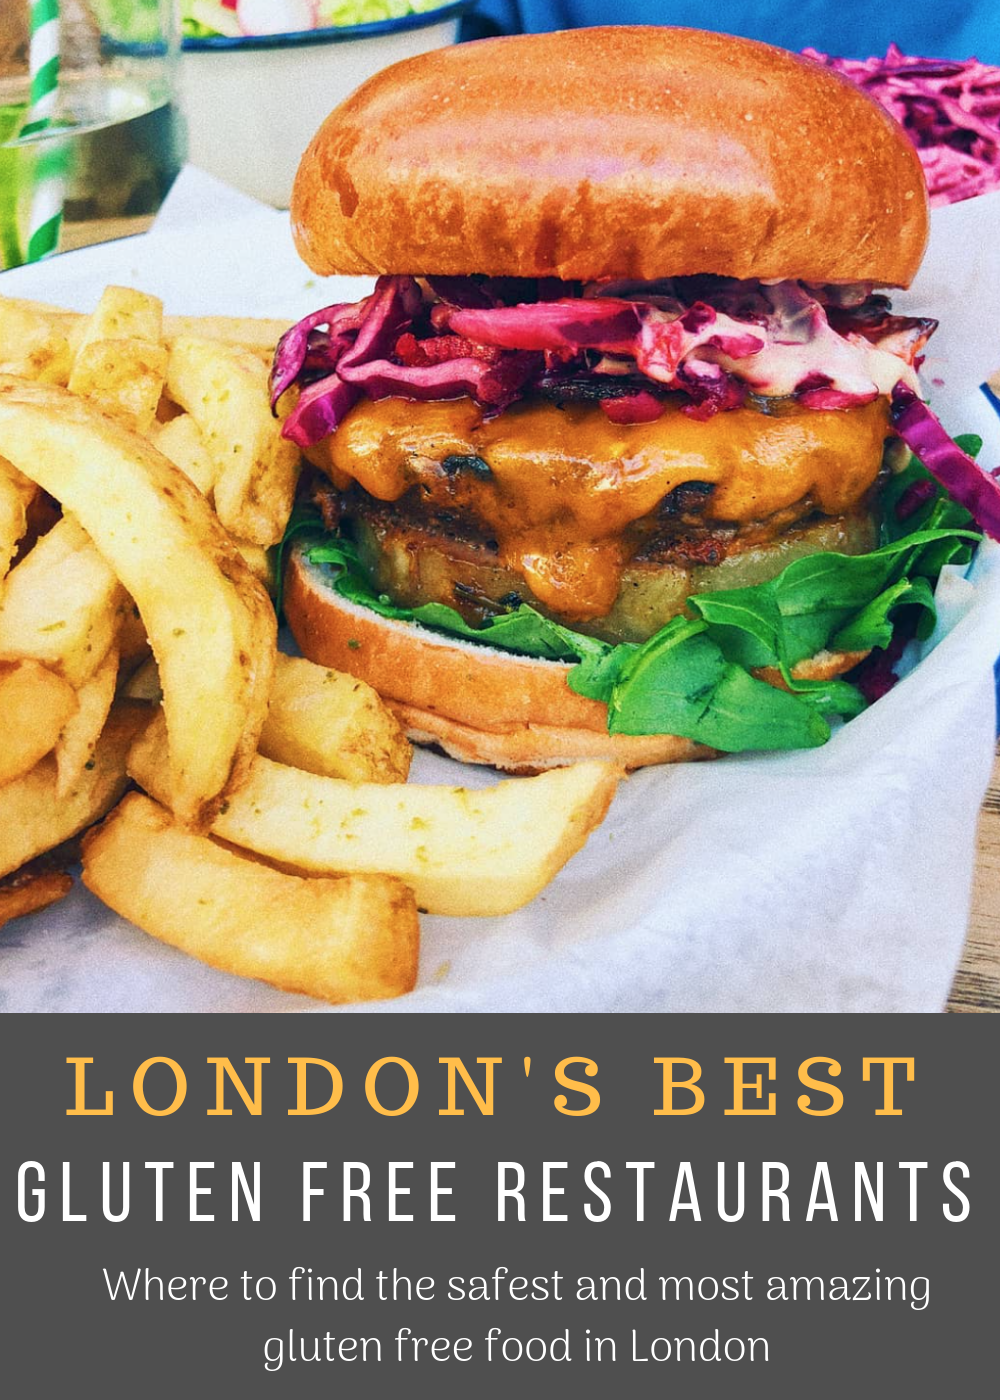 The Best #glutenfree Restaurants! Where to find the safest and most amazing gluten free food in London!